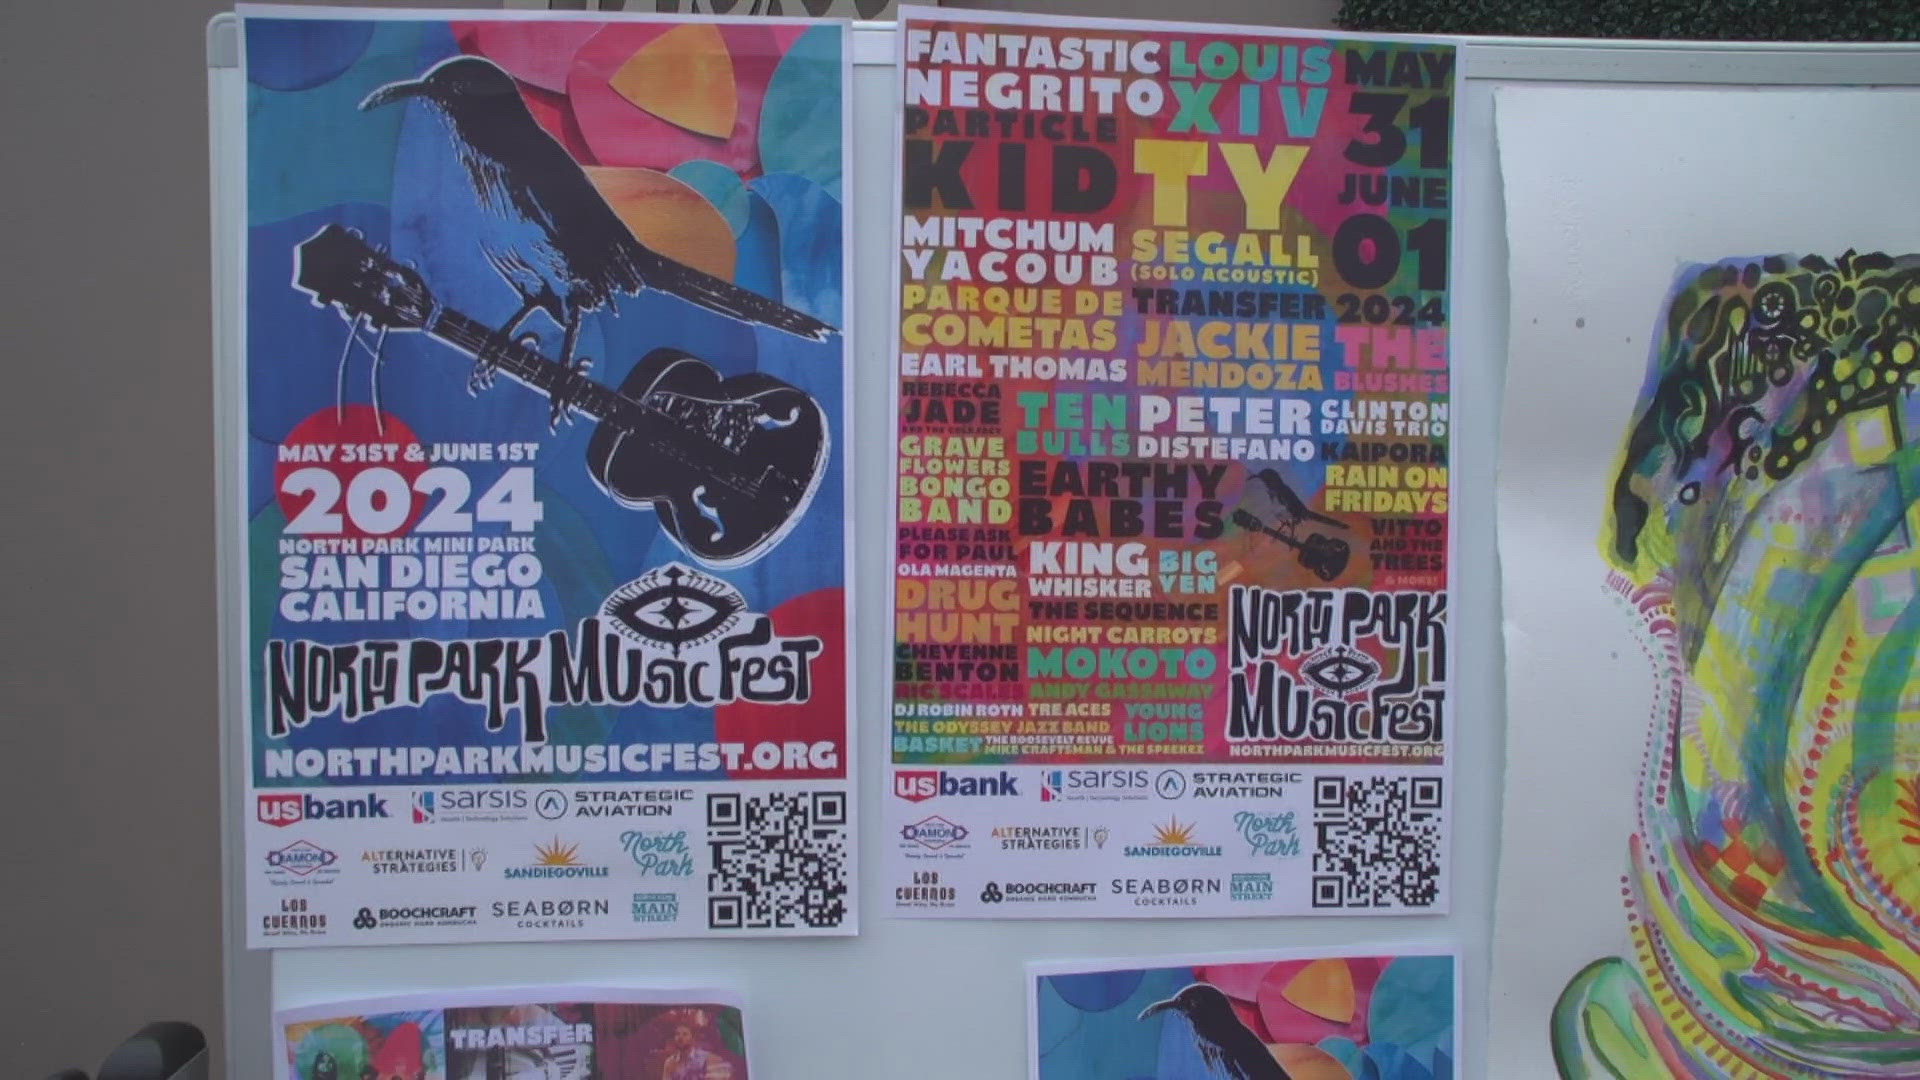 Enjoy more than 40 musical acts at the North Park Music Festival May 31 and June 1.